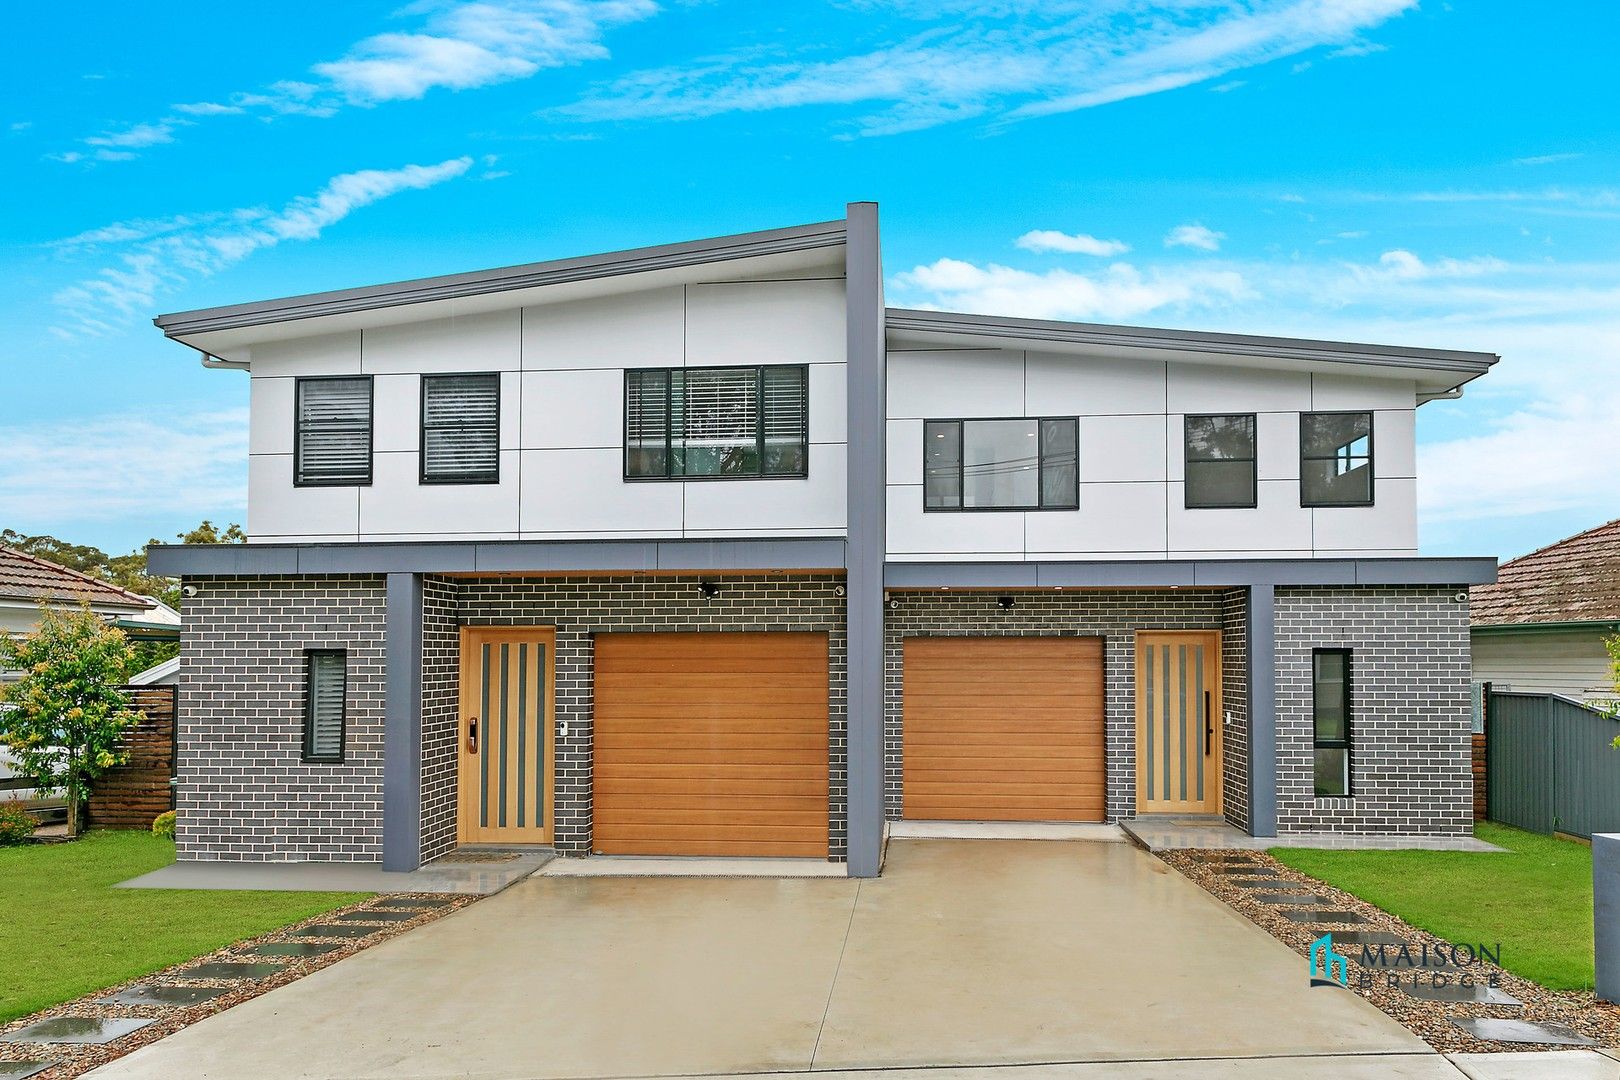 4 bedrooms Semi-Detached in 60 Kirby Street RYDALMERE NSW, 2116